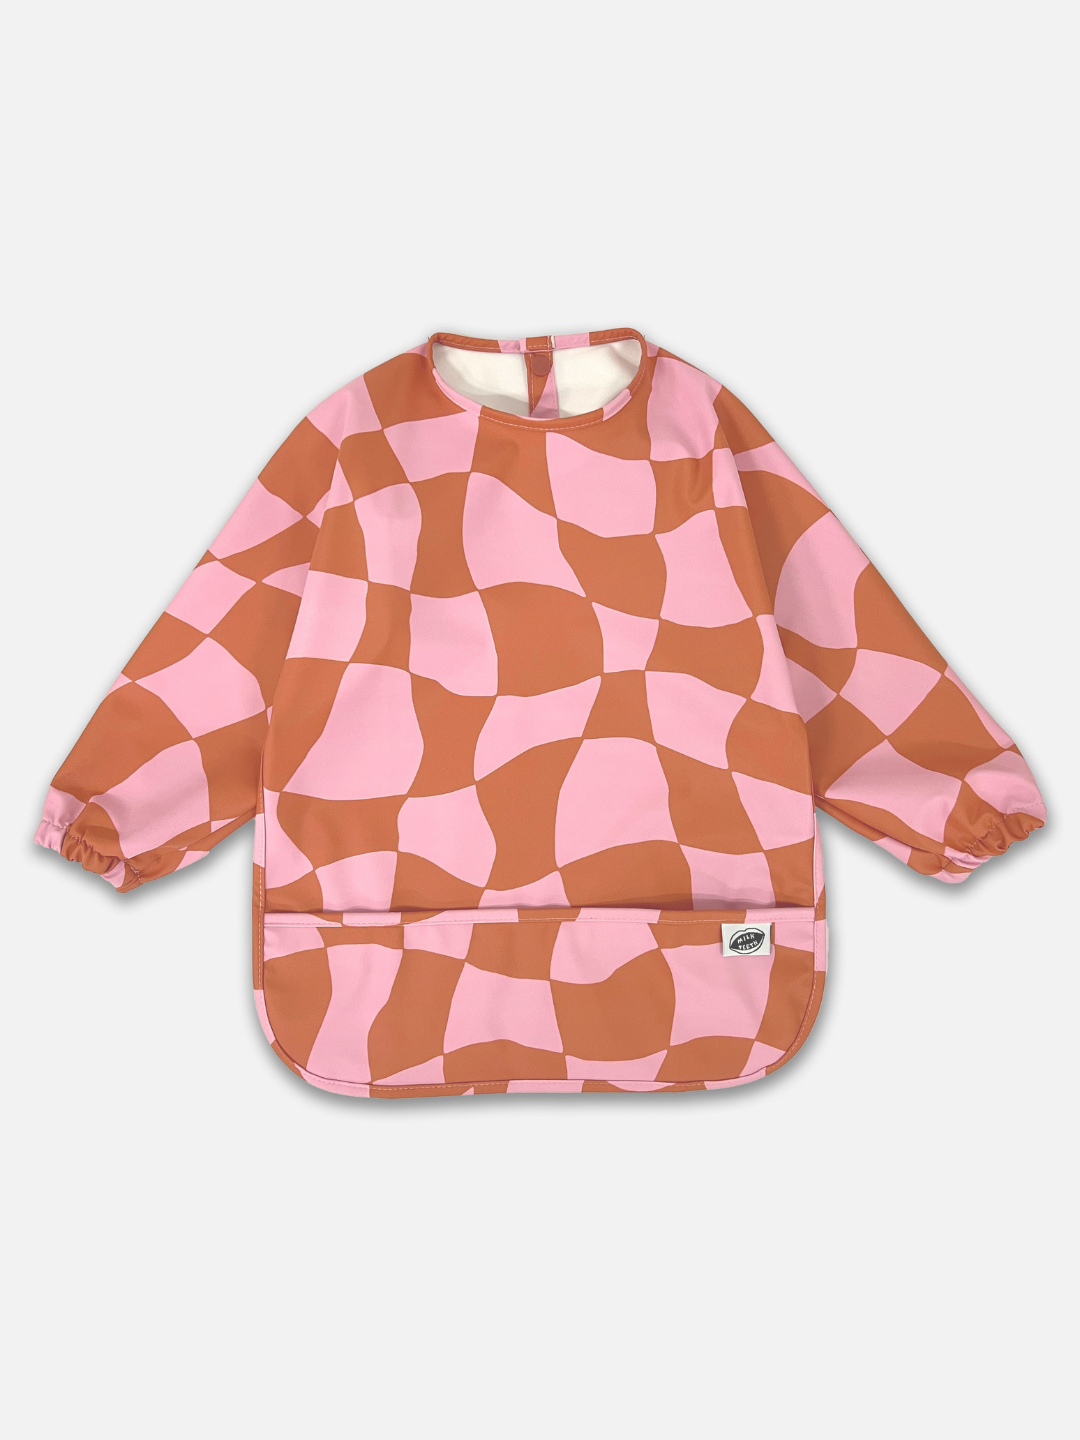 A front view of the long sleeve light pink and rust wavy checked bib with a front pocket.